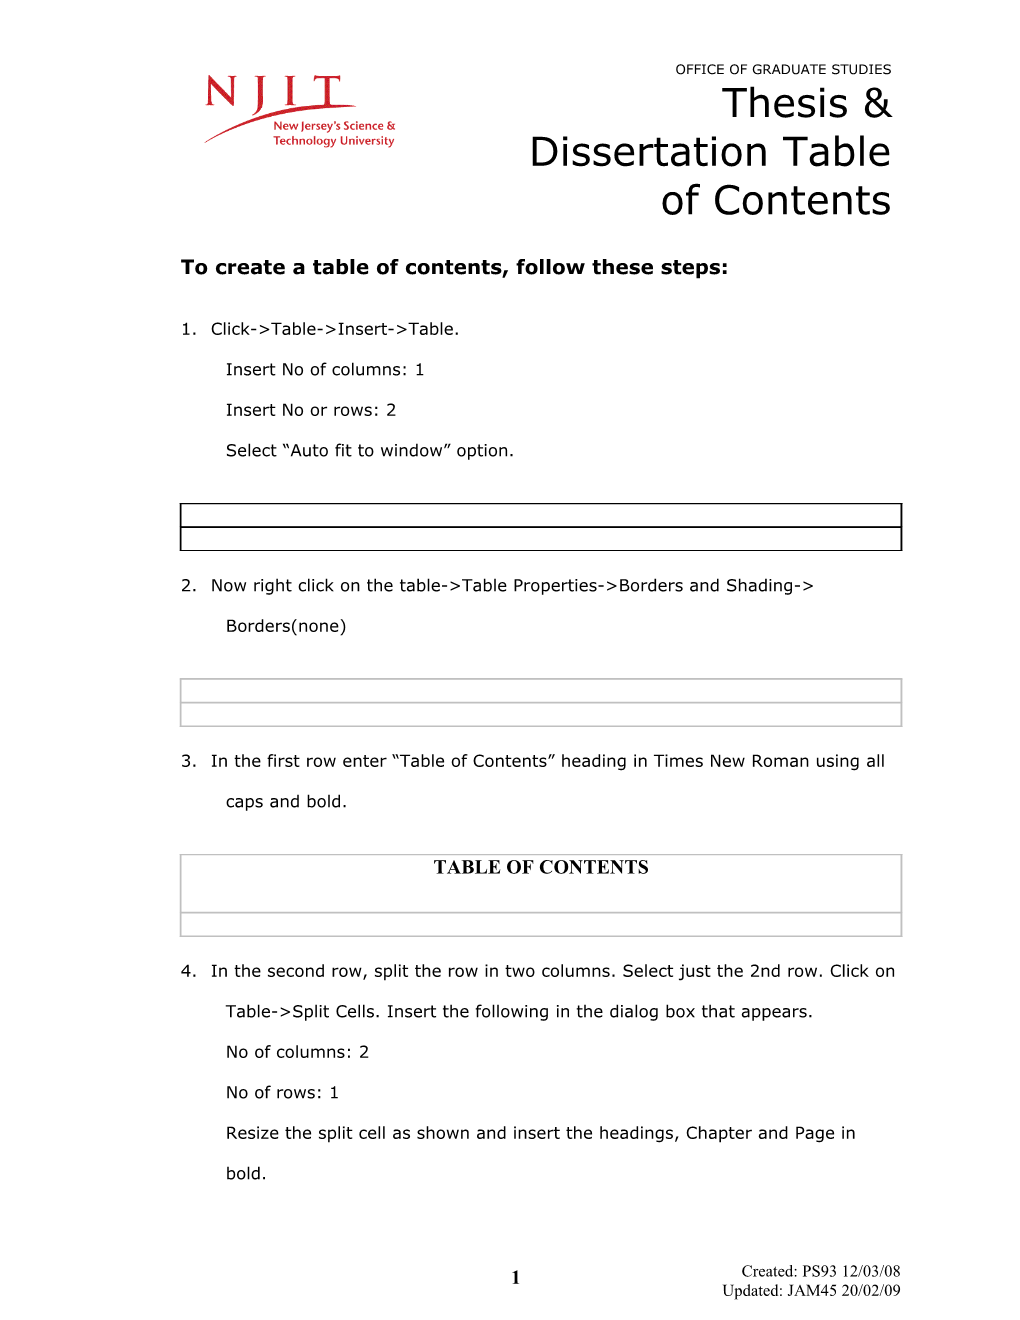 To Create a Table of Contents, Follow the Following Steps